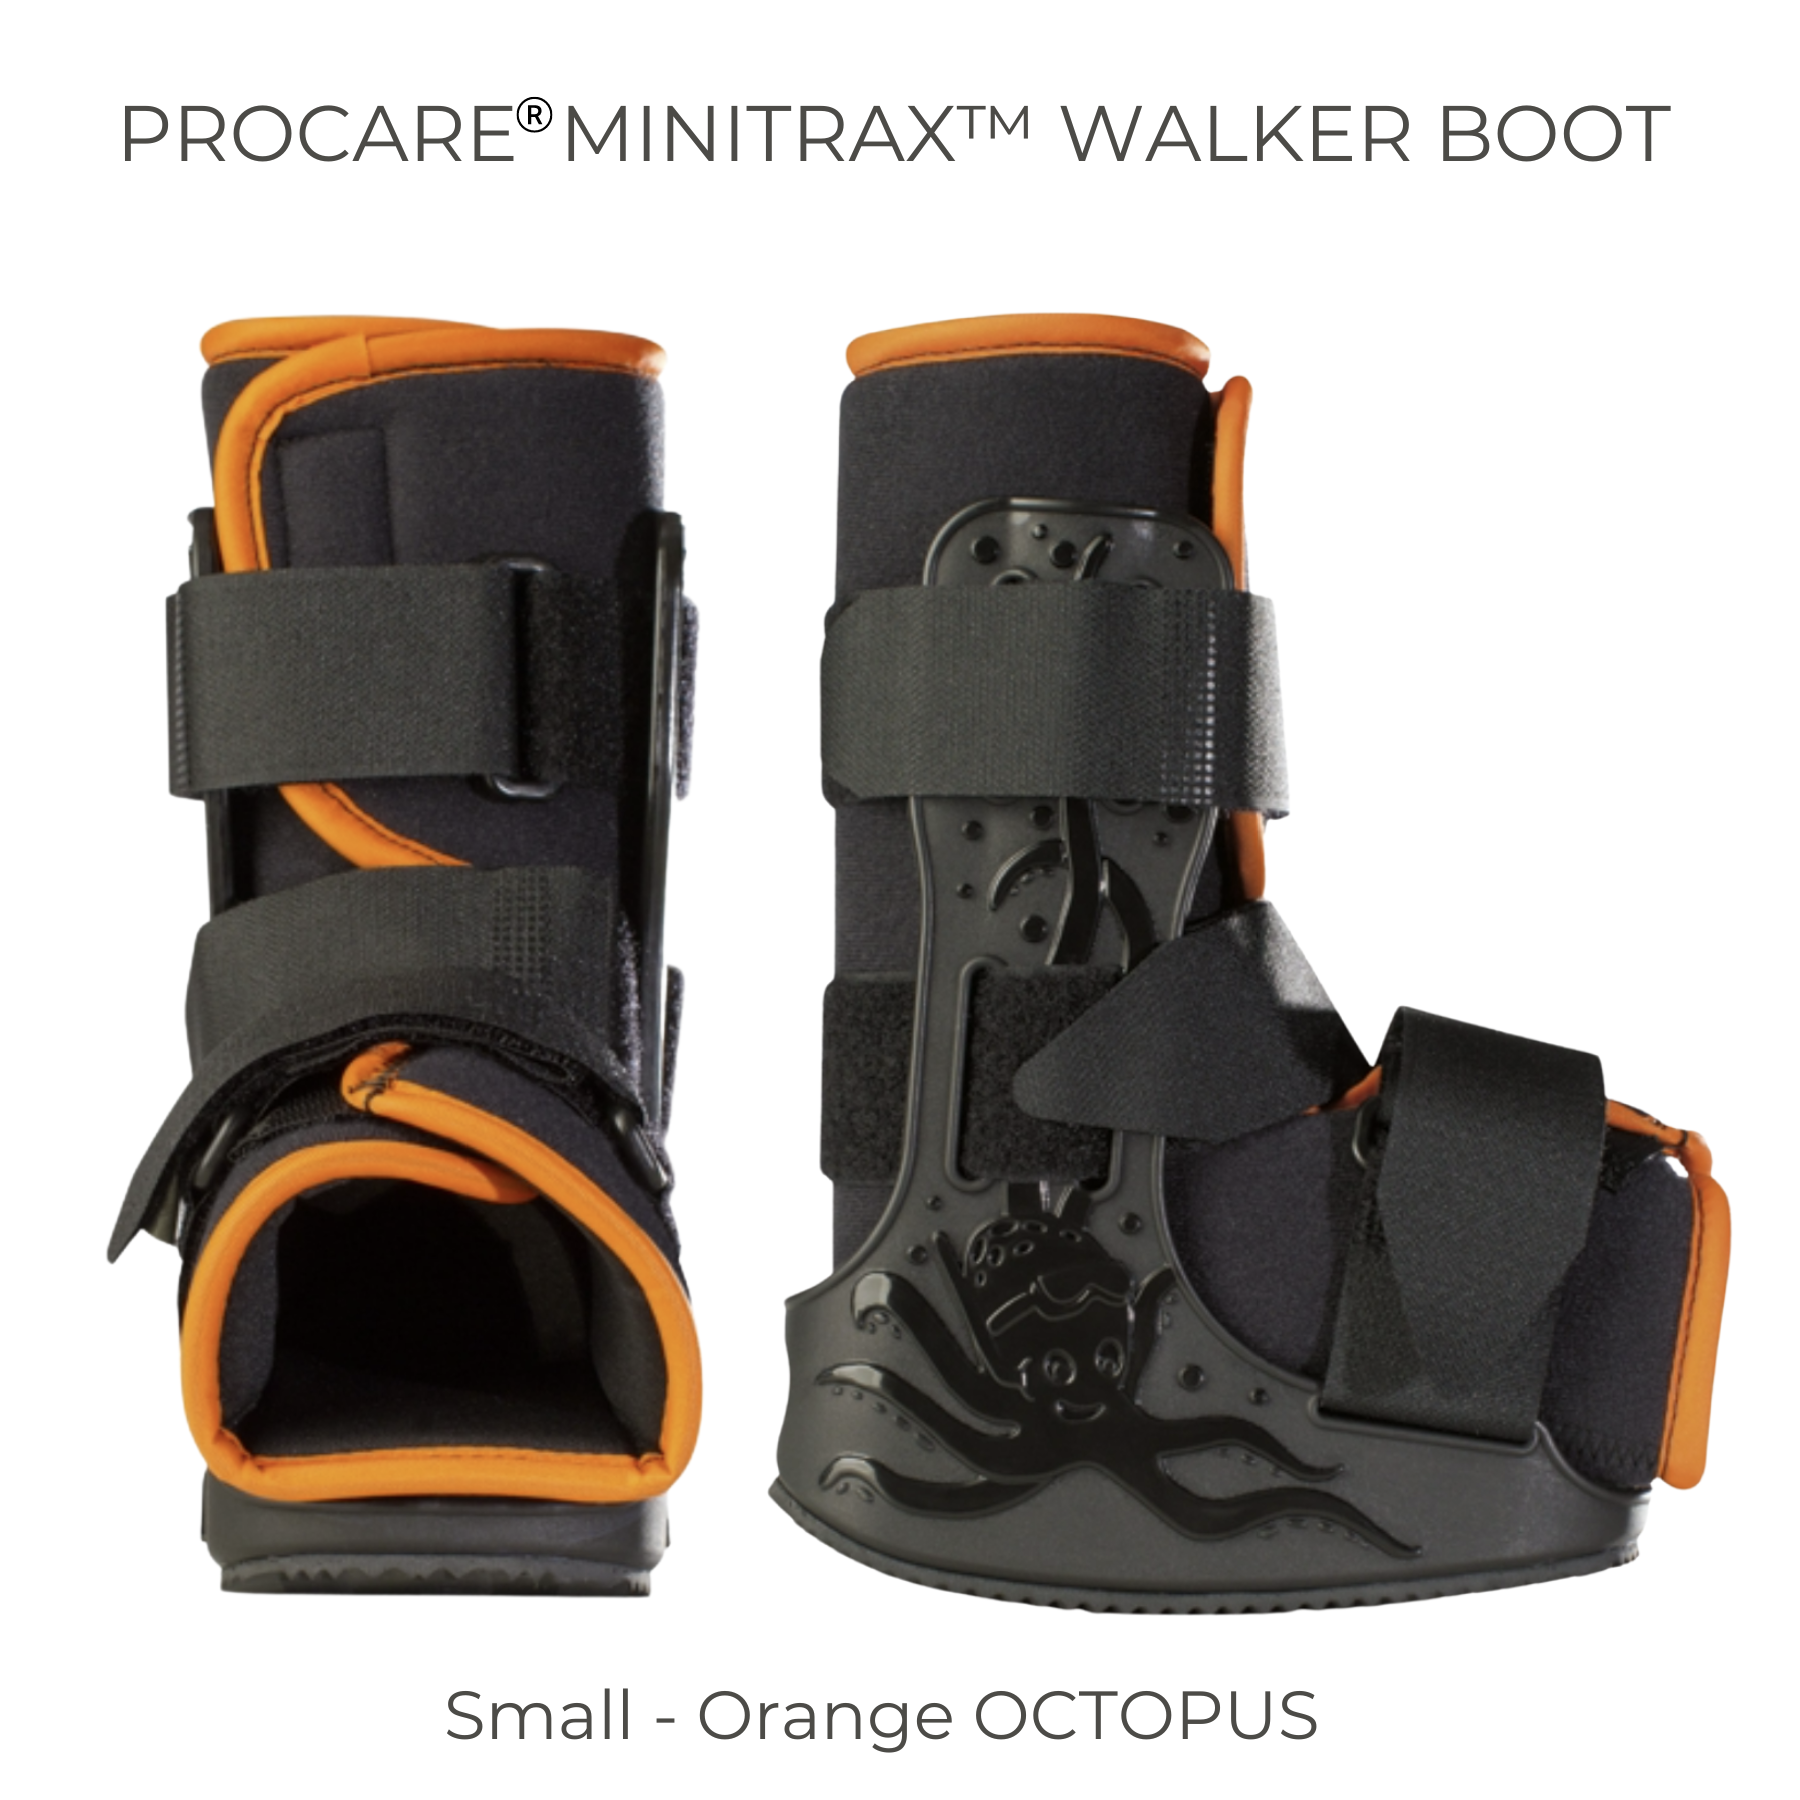 DJO MiniTrax™ Small Walker Boot Orange/Black Octopus Design for Toddlers 1 to 2-1/2 Years of Age. US Shoe Size Up to 8-1/2.